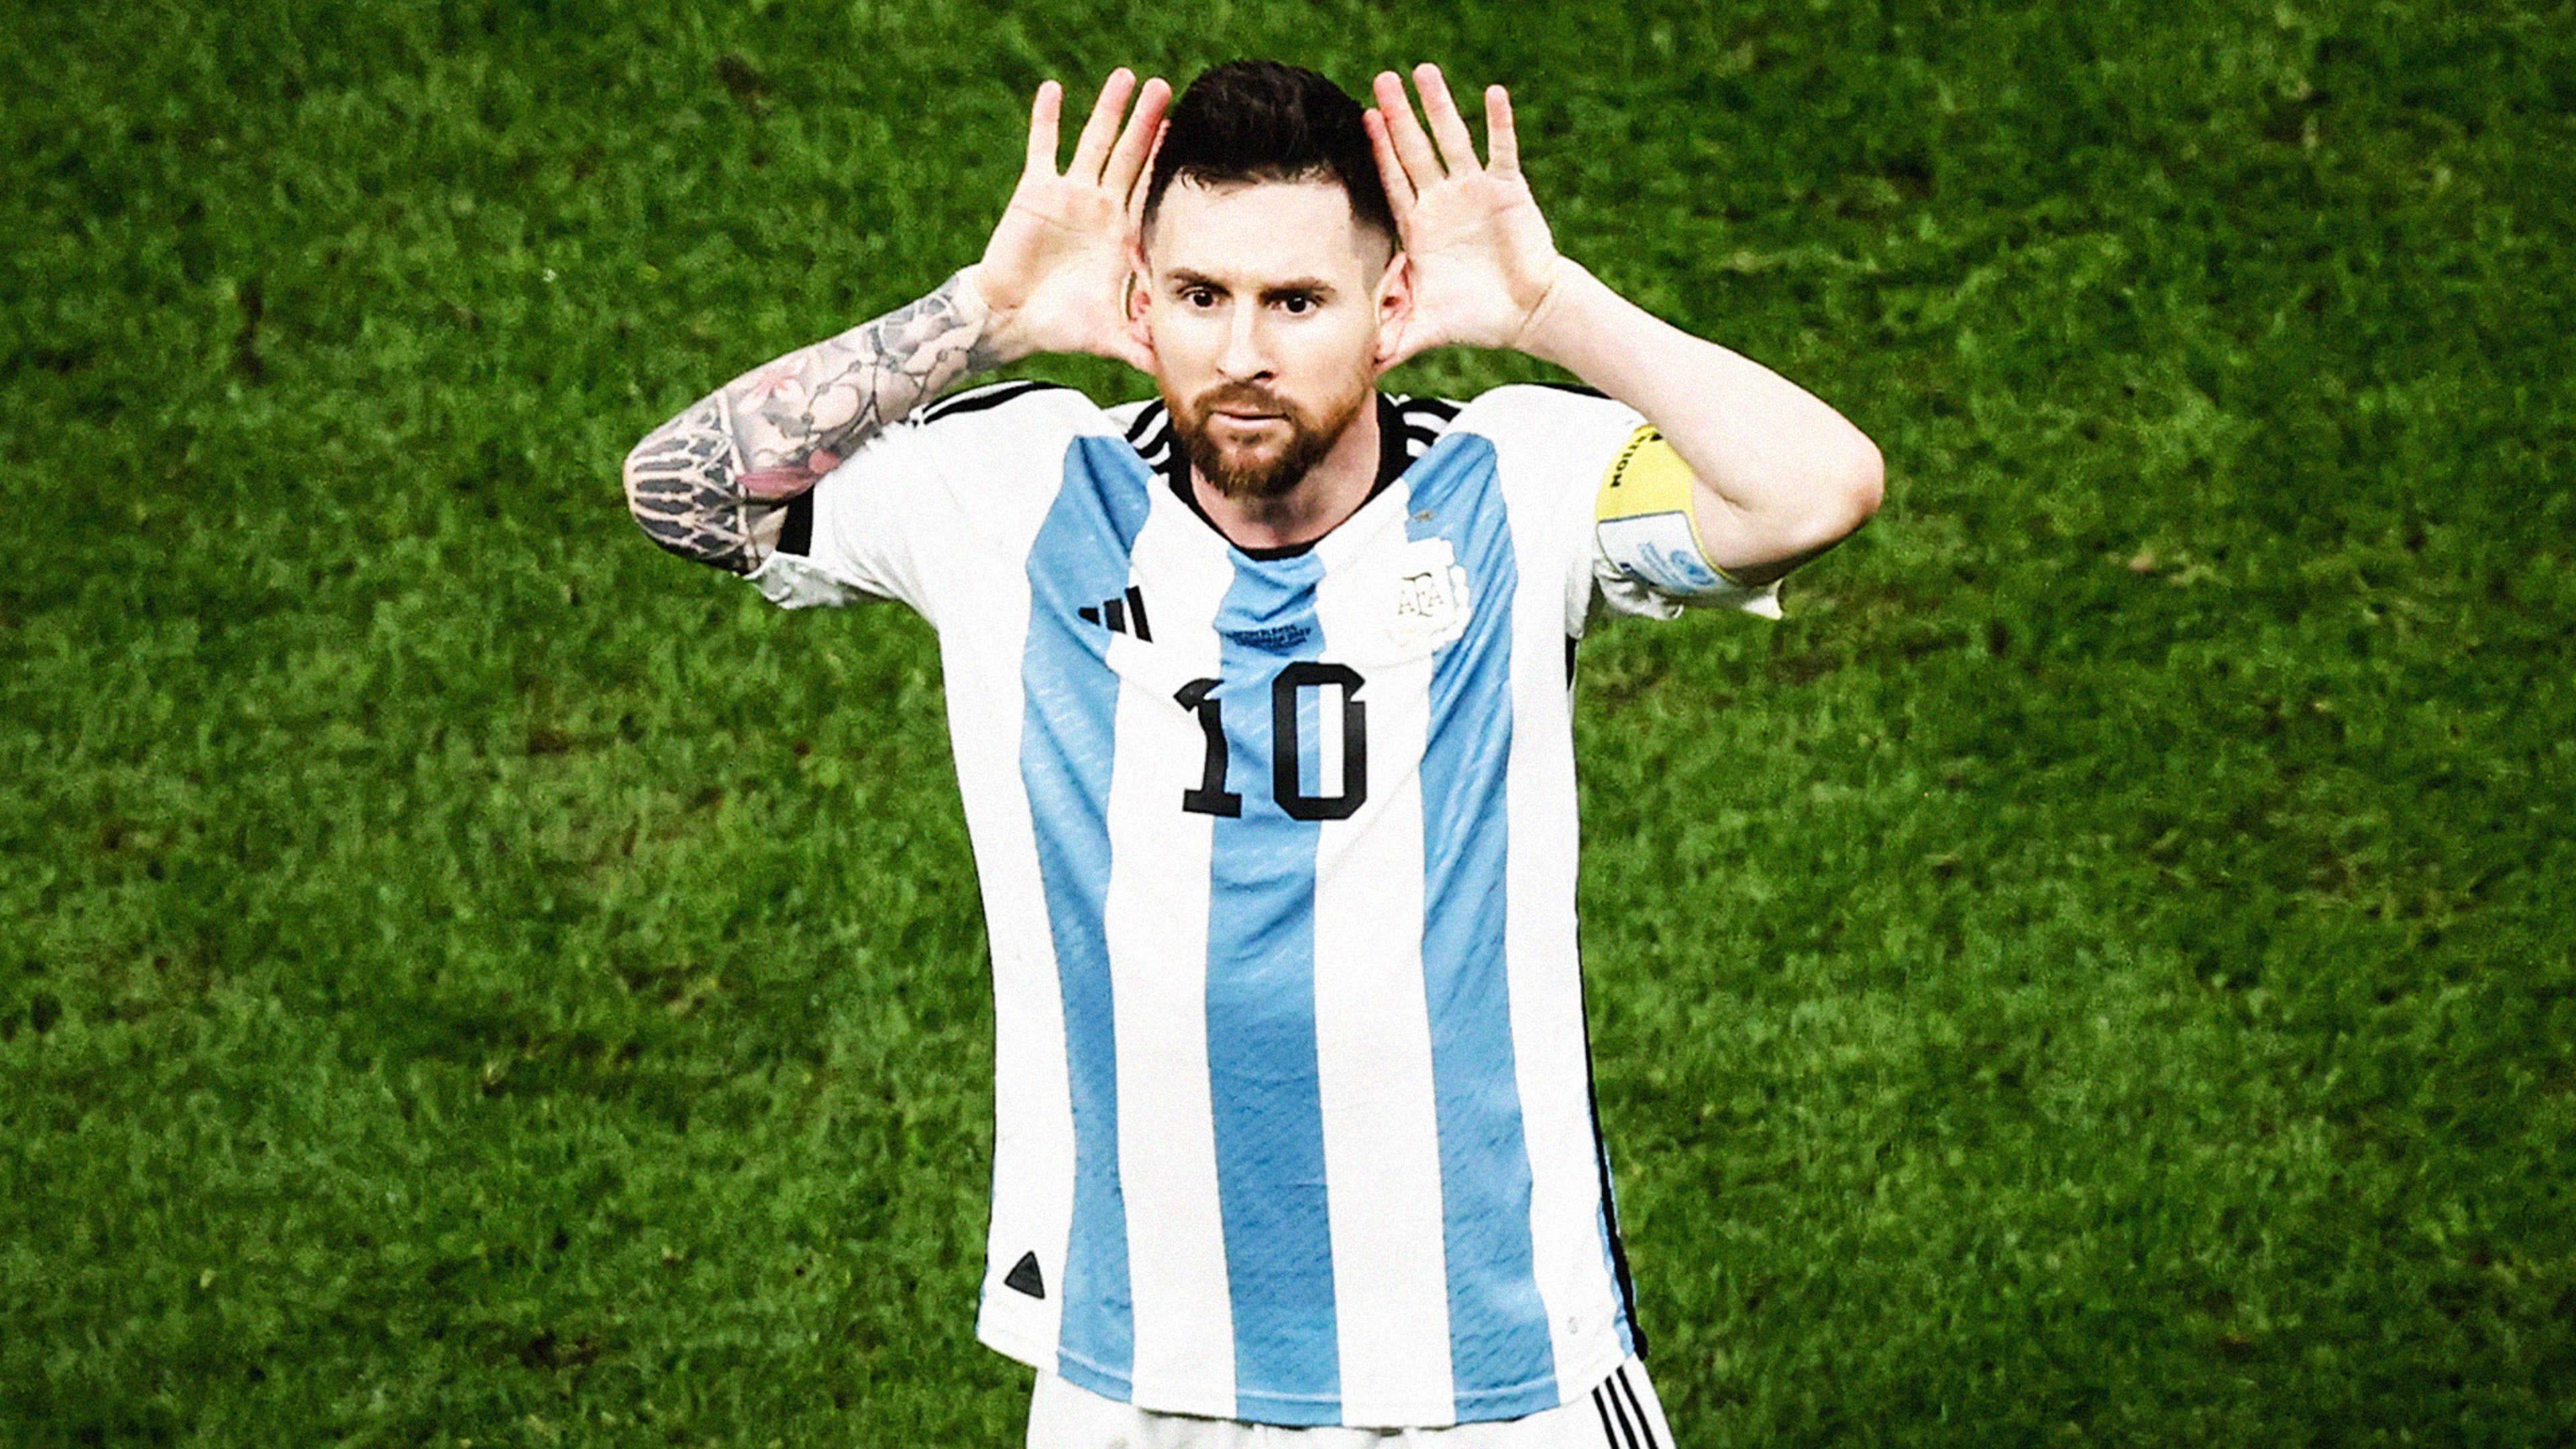 With or without a World Cup win: Messi has shown he's the GOAT at Qatar 2022. Goal.com Uganda